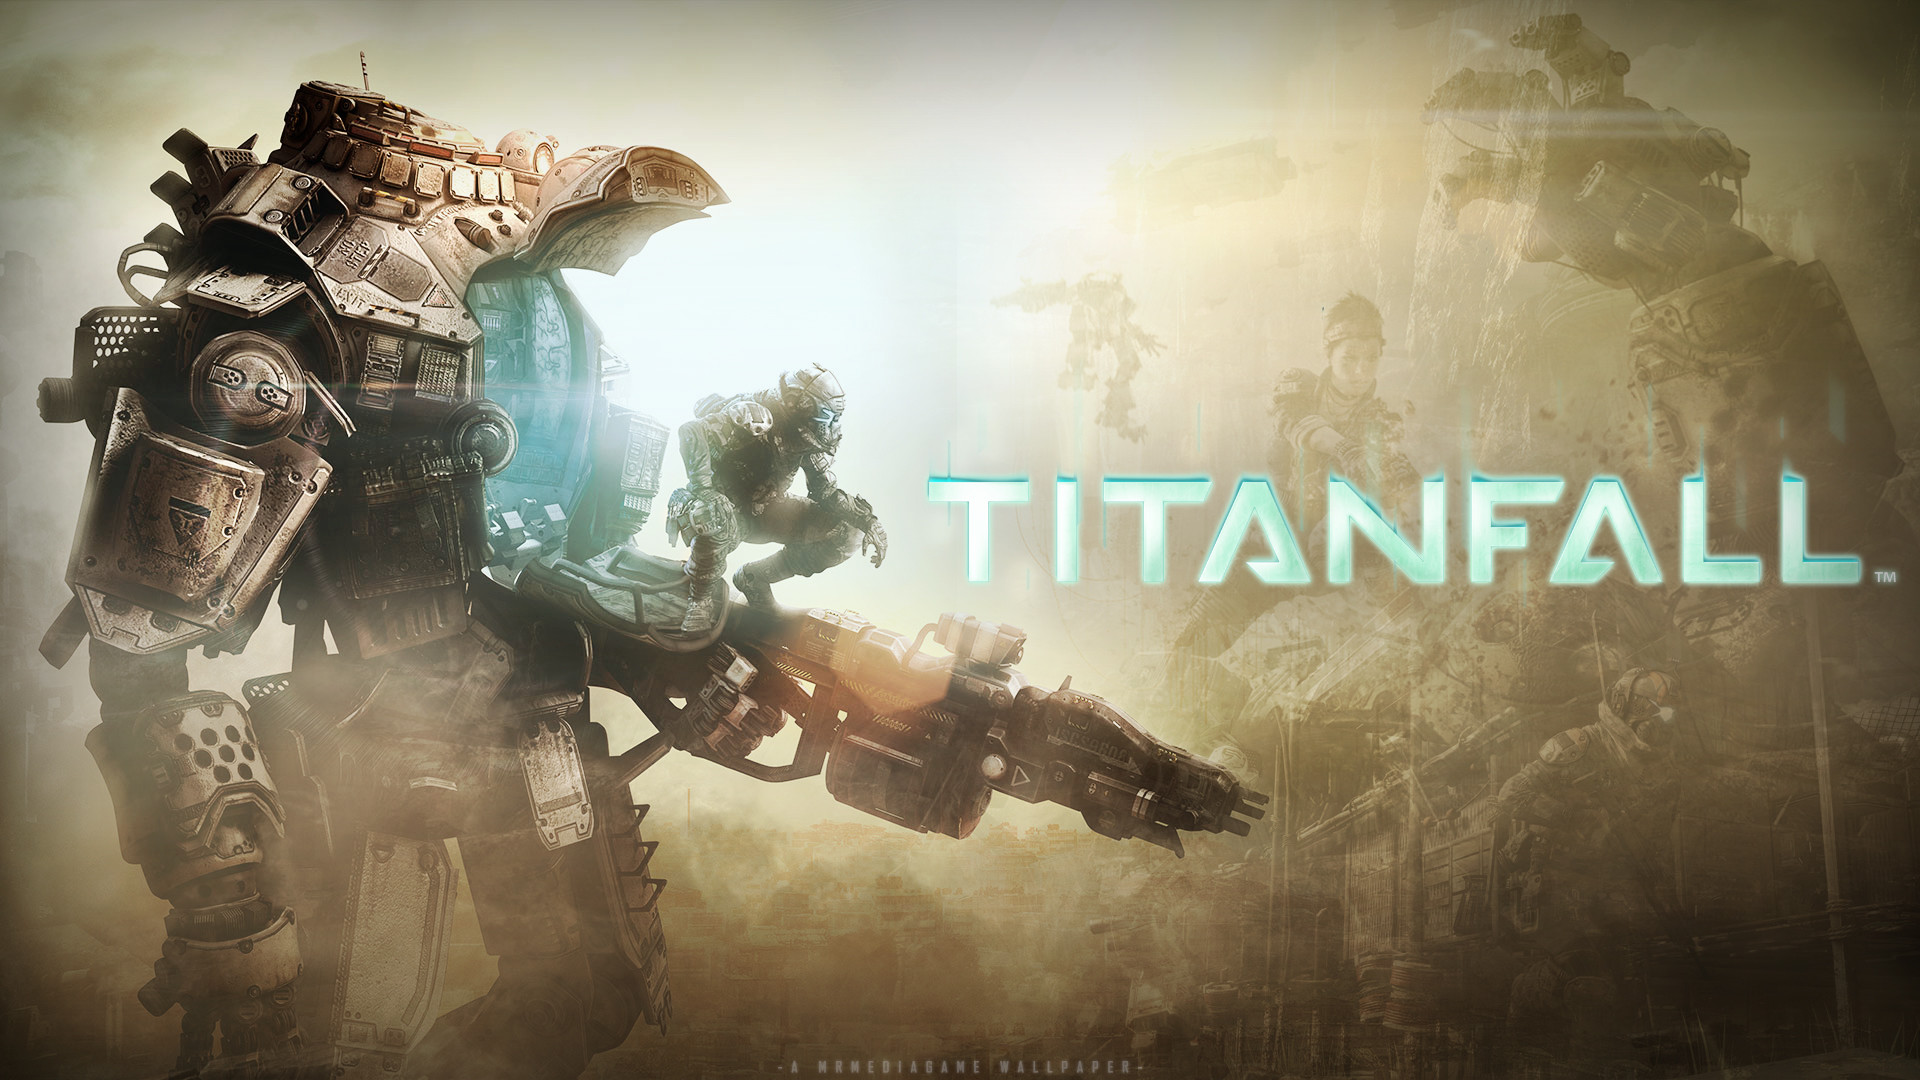 1920x1080 Titanfall- Wallpaper by MrMediaGame Titanfall- Wallpaper by MrMediaGame